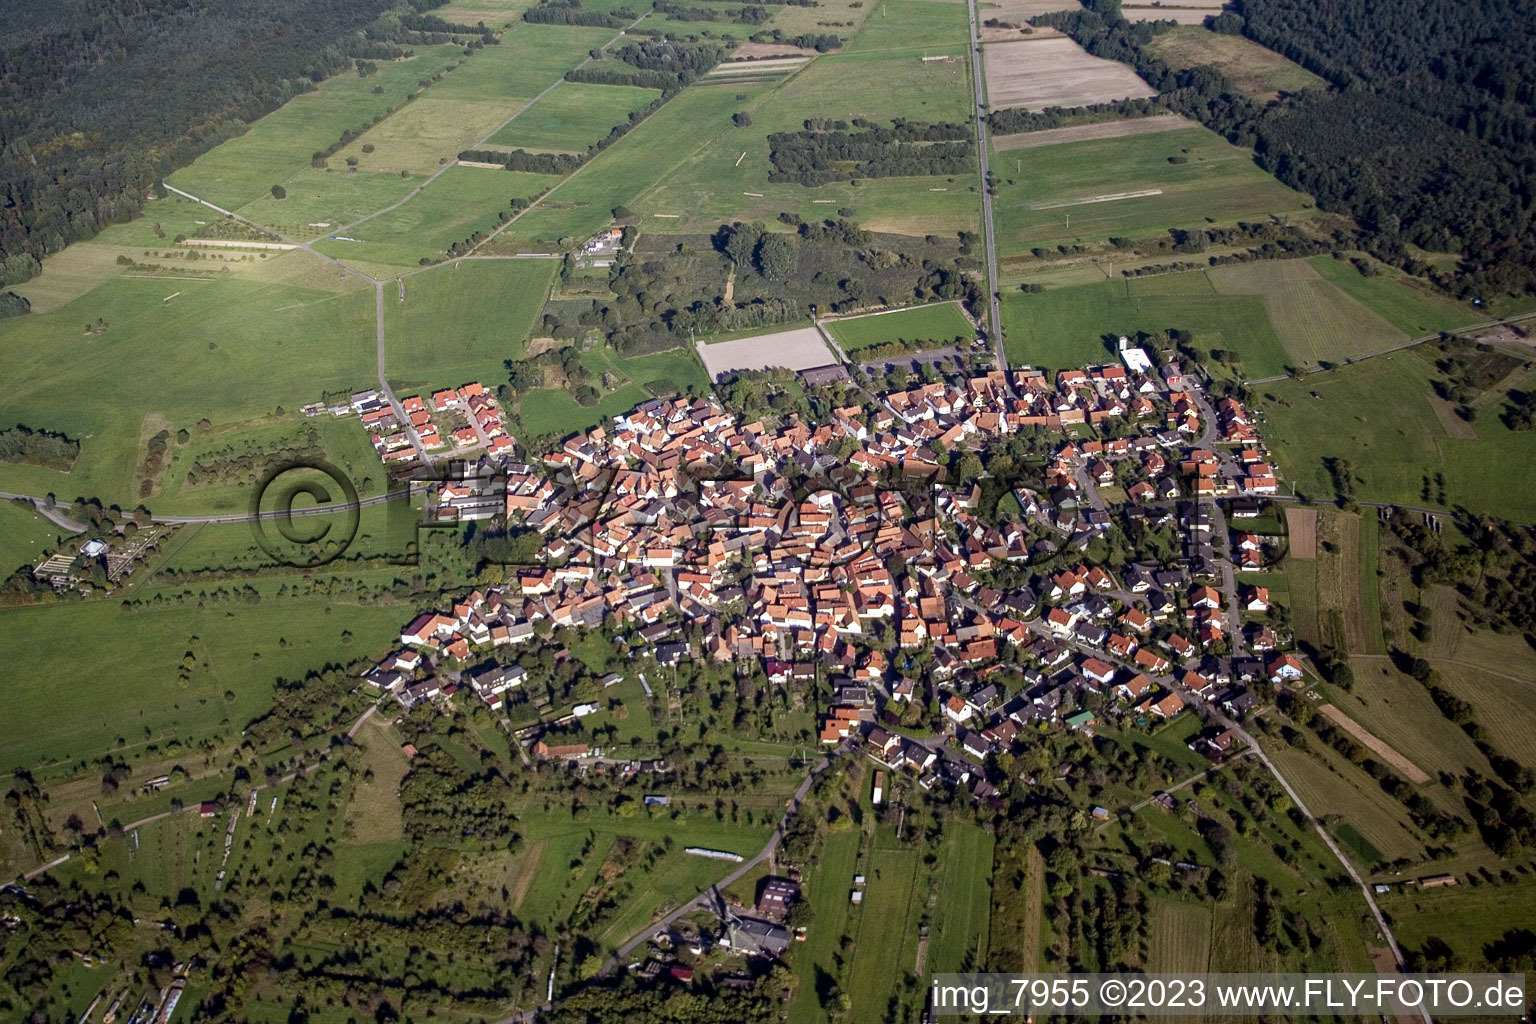 Aerial photograpy of District Büchelberg in Wörth am Rhein in the state Rhineland-Palatinate, Germany